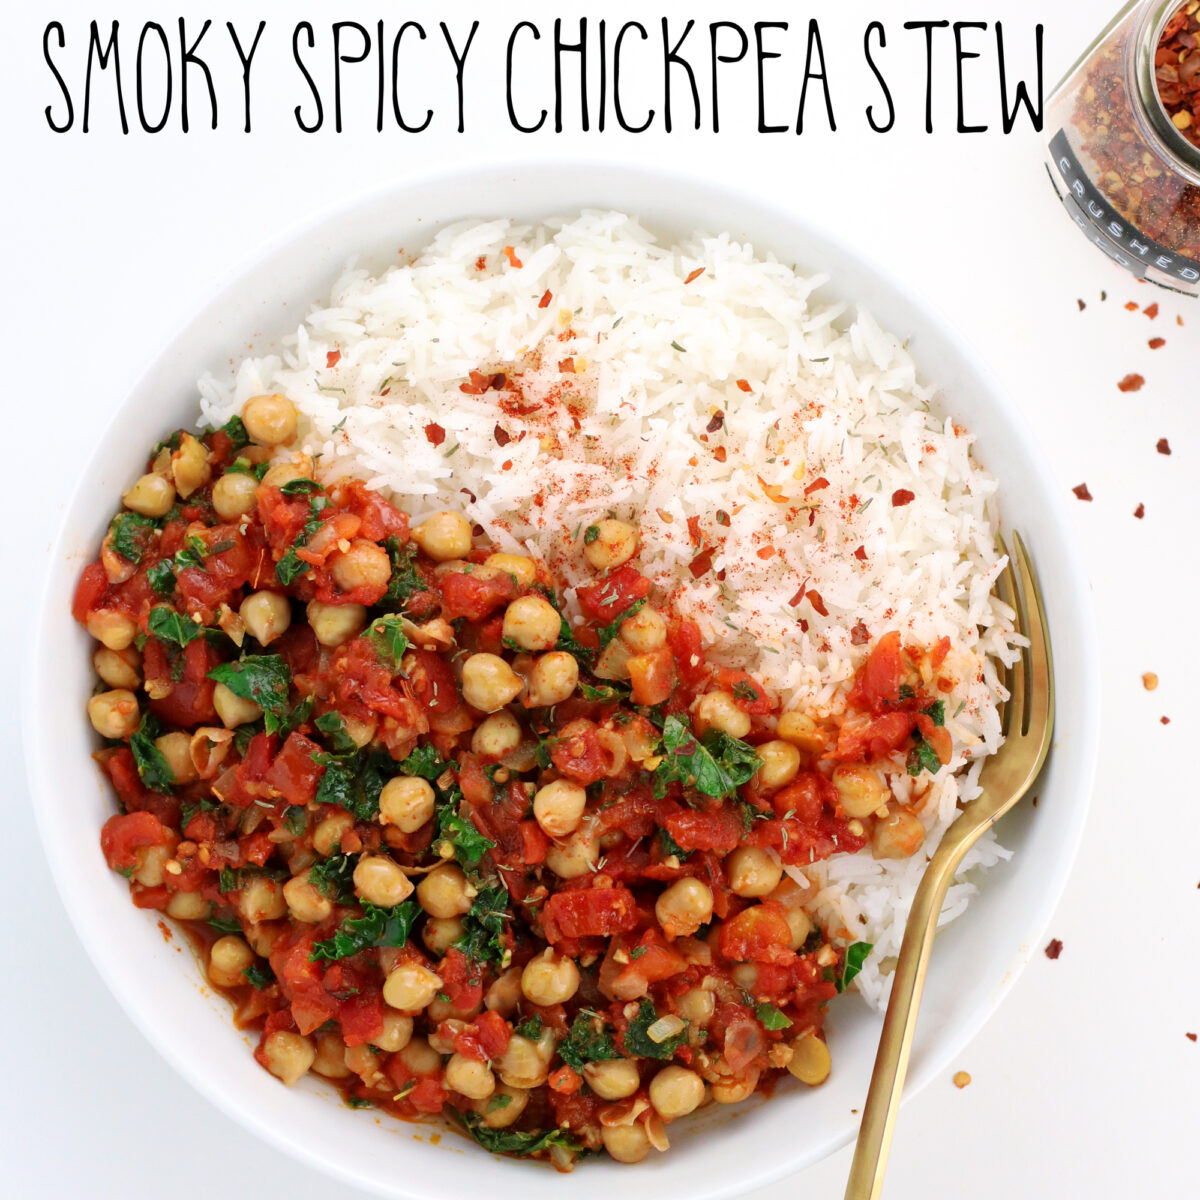 Smoky Spicy Chickpea Stew